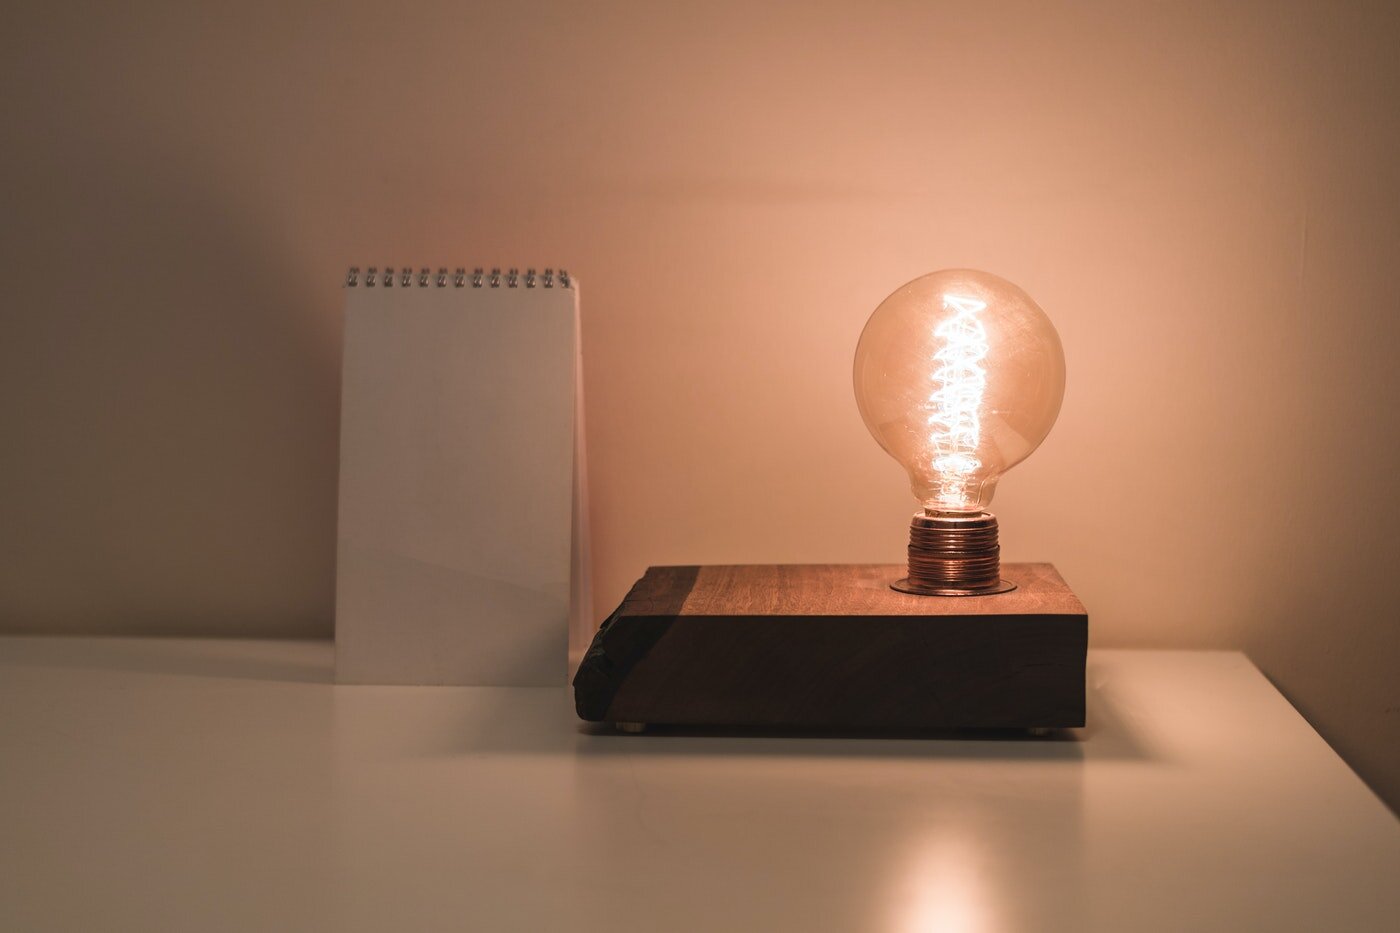 lightbulb on nightstand next to notepad - 10 surefire ways to trim your energy use